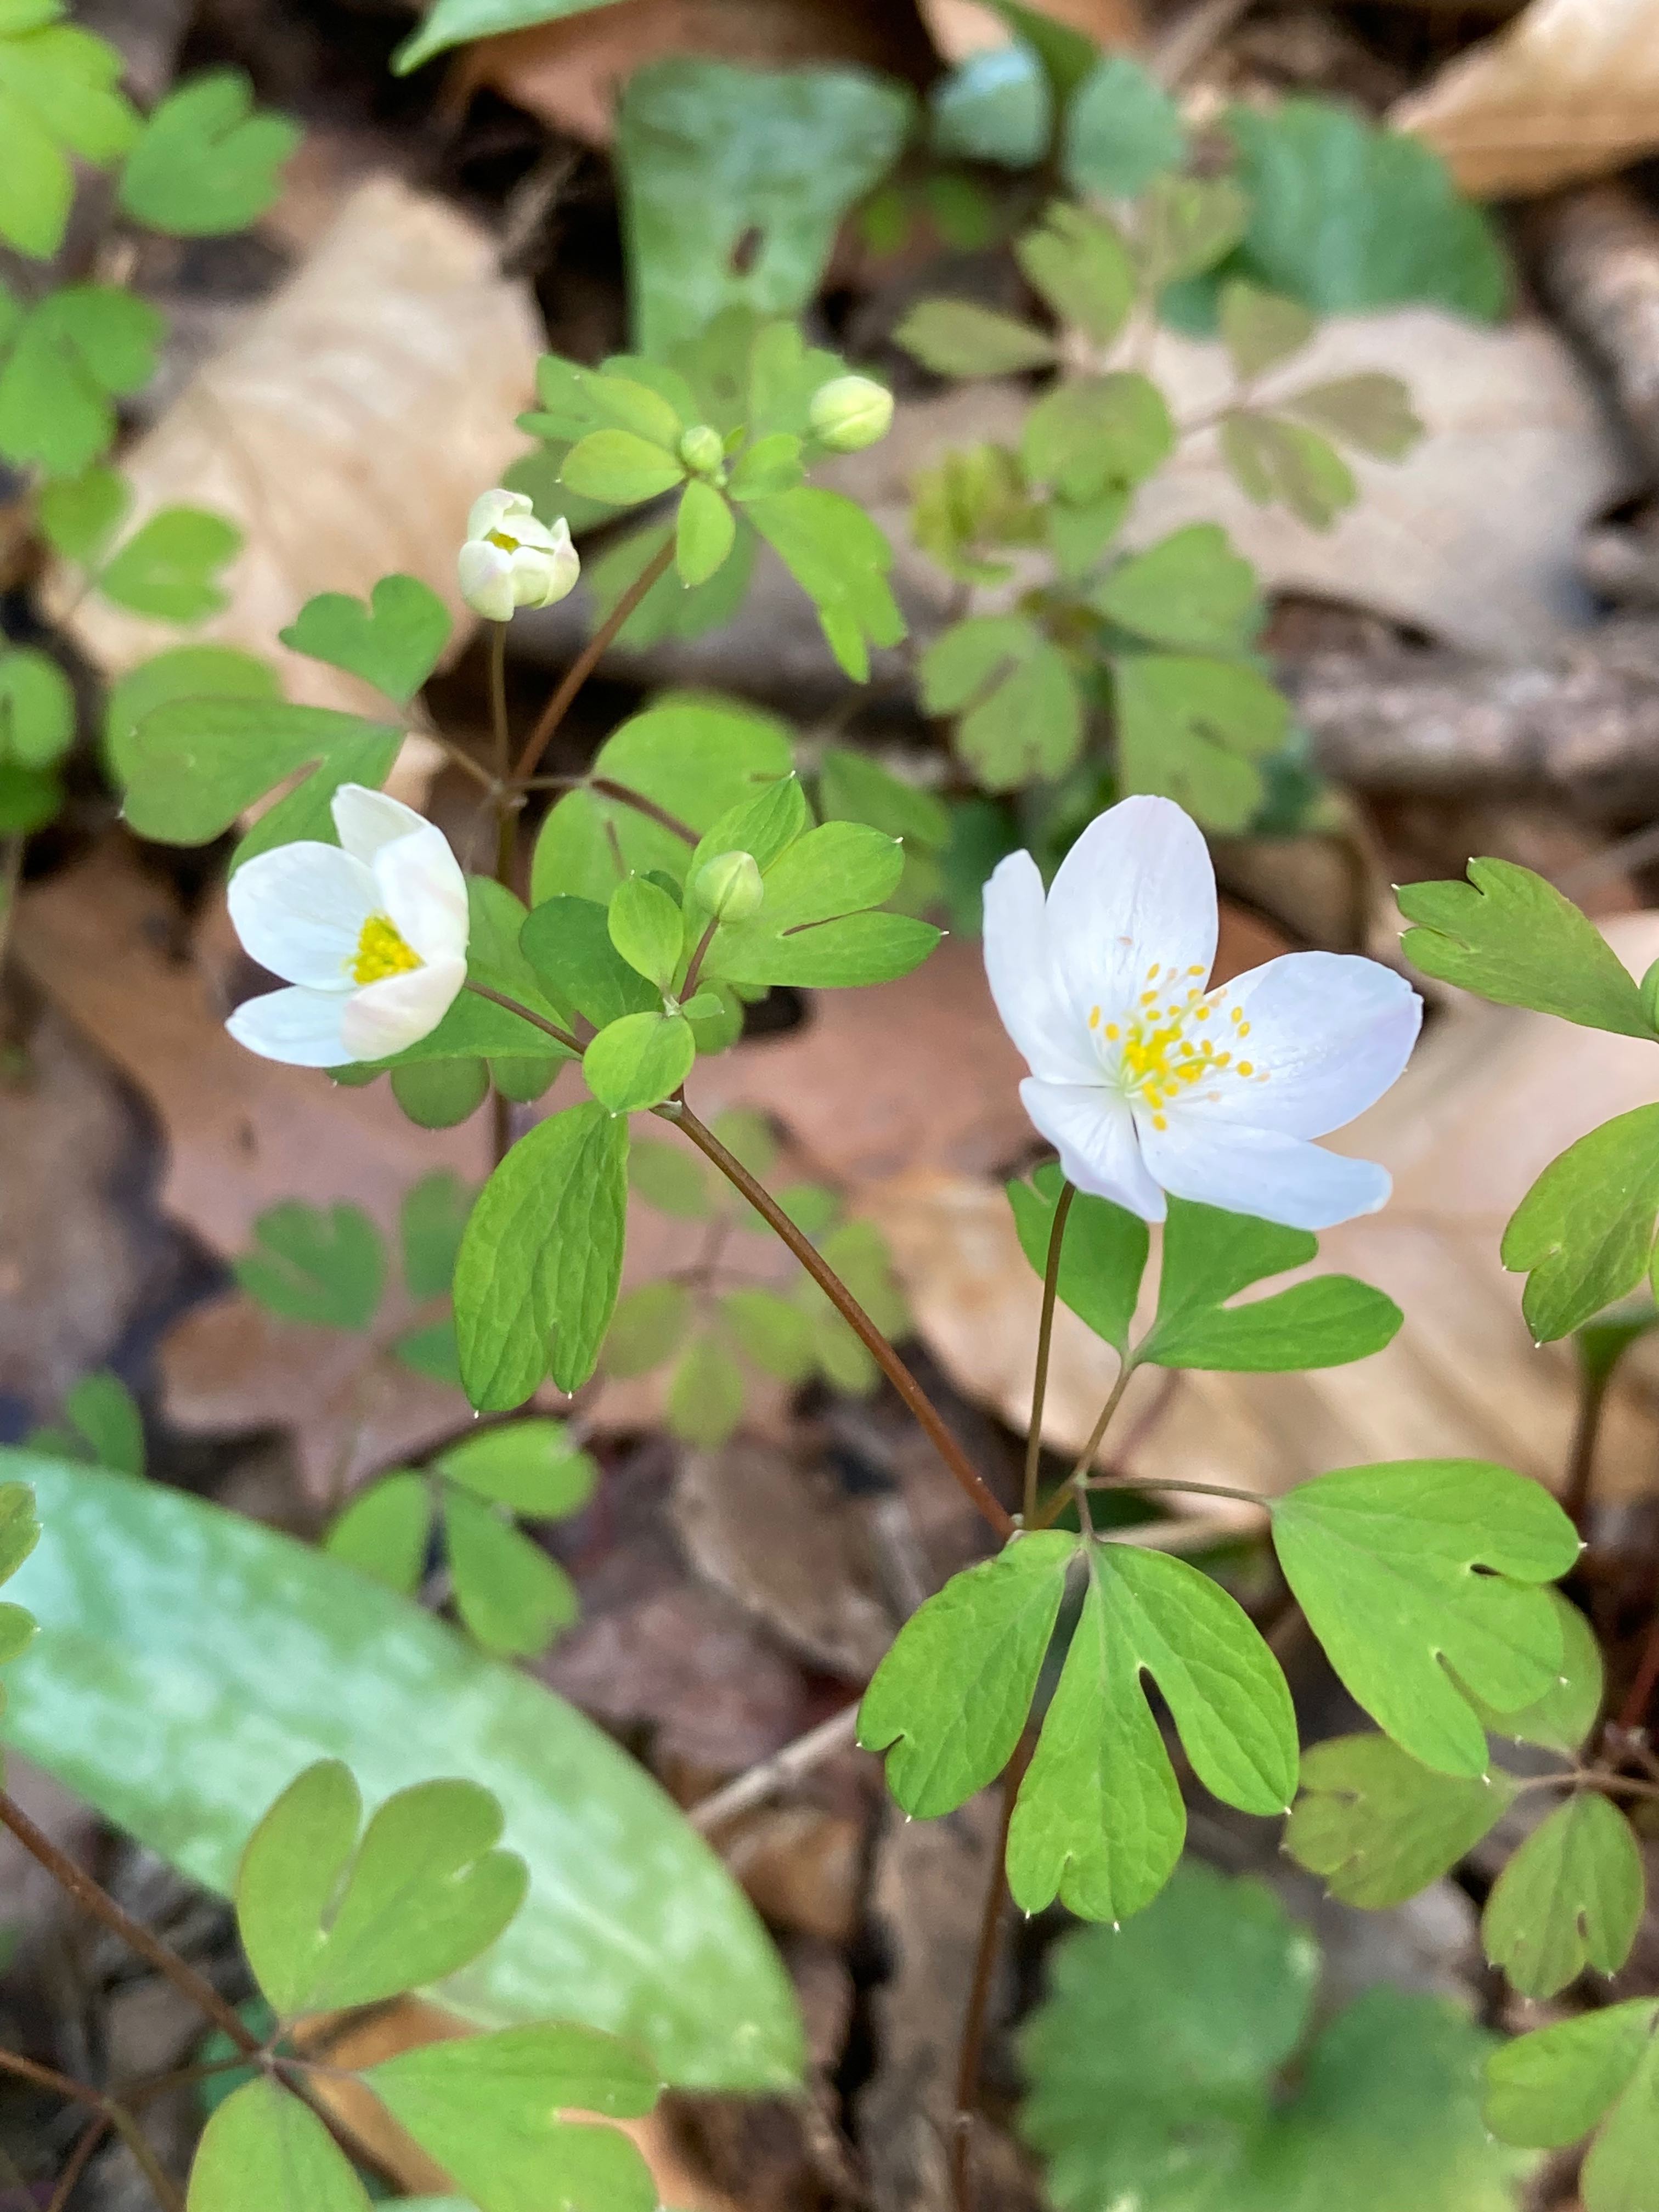 The Scientific Name is Enemion biternatum [= Isopyrum biternatum]. You will likely hear them called False Rue-anemone, Atlantic Isopyrum. This picture shows the The compound leaves have variously deeply lobed leaflets, some looking like mittens. The similar Rue Anemone (<em>Thalictrum thalictroides</em>) has leaflets that are more rounded and only slightly lobed. of Enemion biternatum [= Isopyrum biternatum]